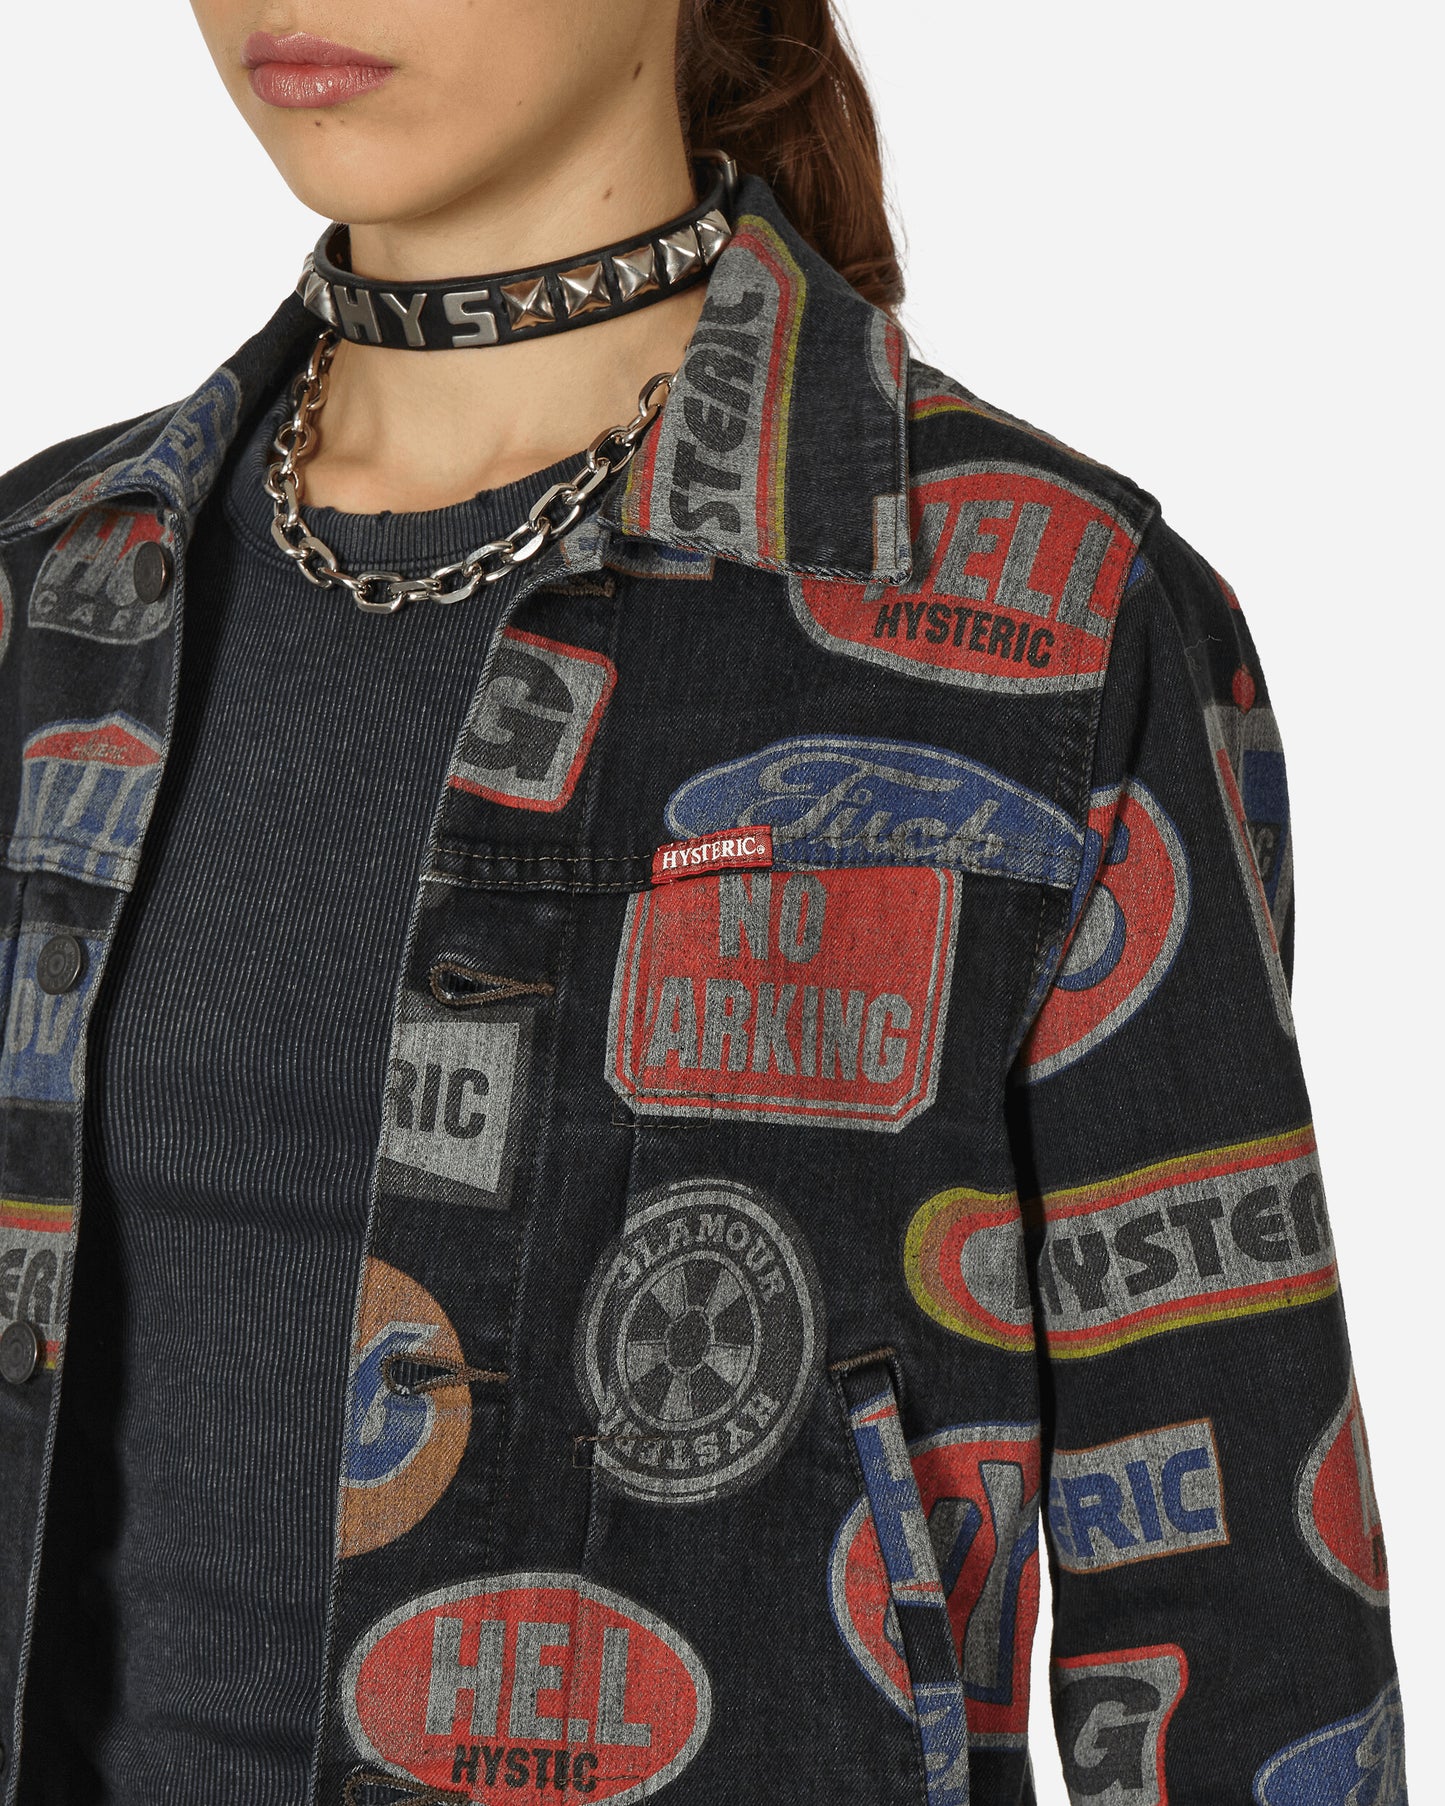 Hysteric Glamour Wmns Jacket Hysteric Motor Black Coats and Jackets Bomber Jackets 01233AB06 99